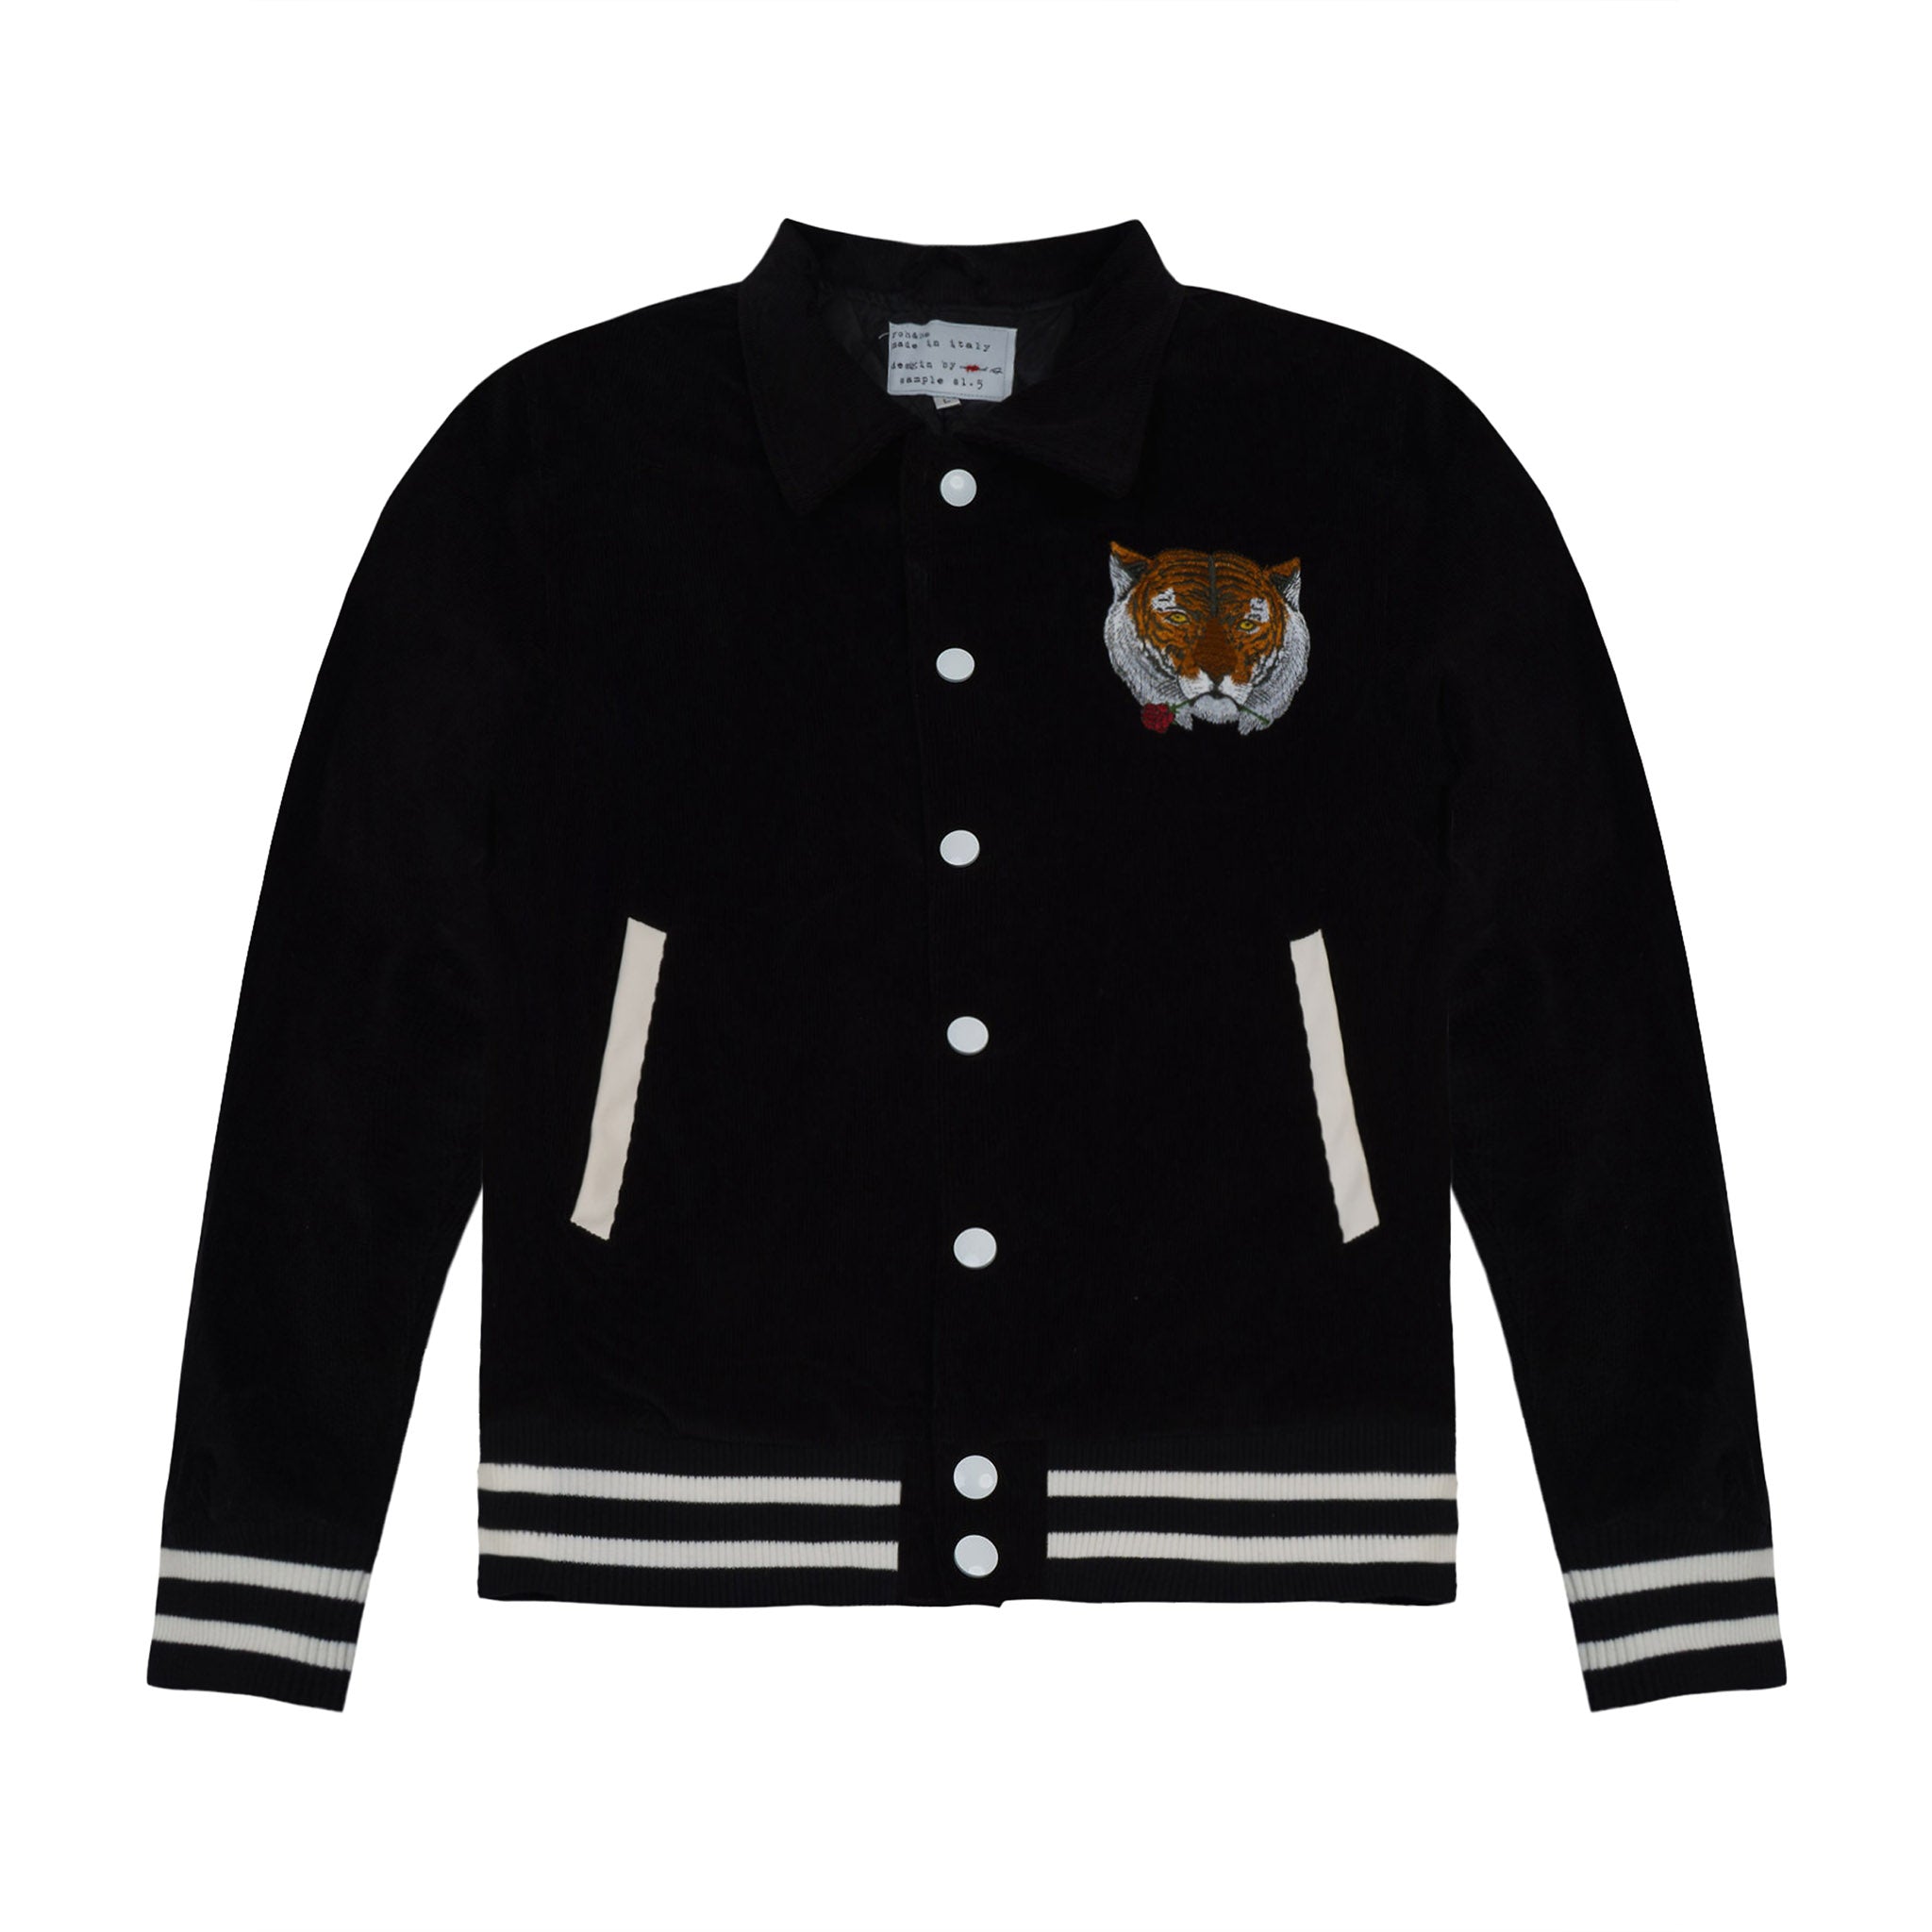 1of1 his corduroy jacket heart of the lion  limited edition